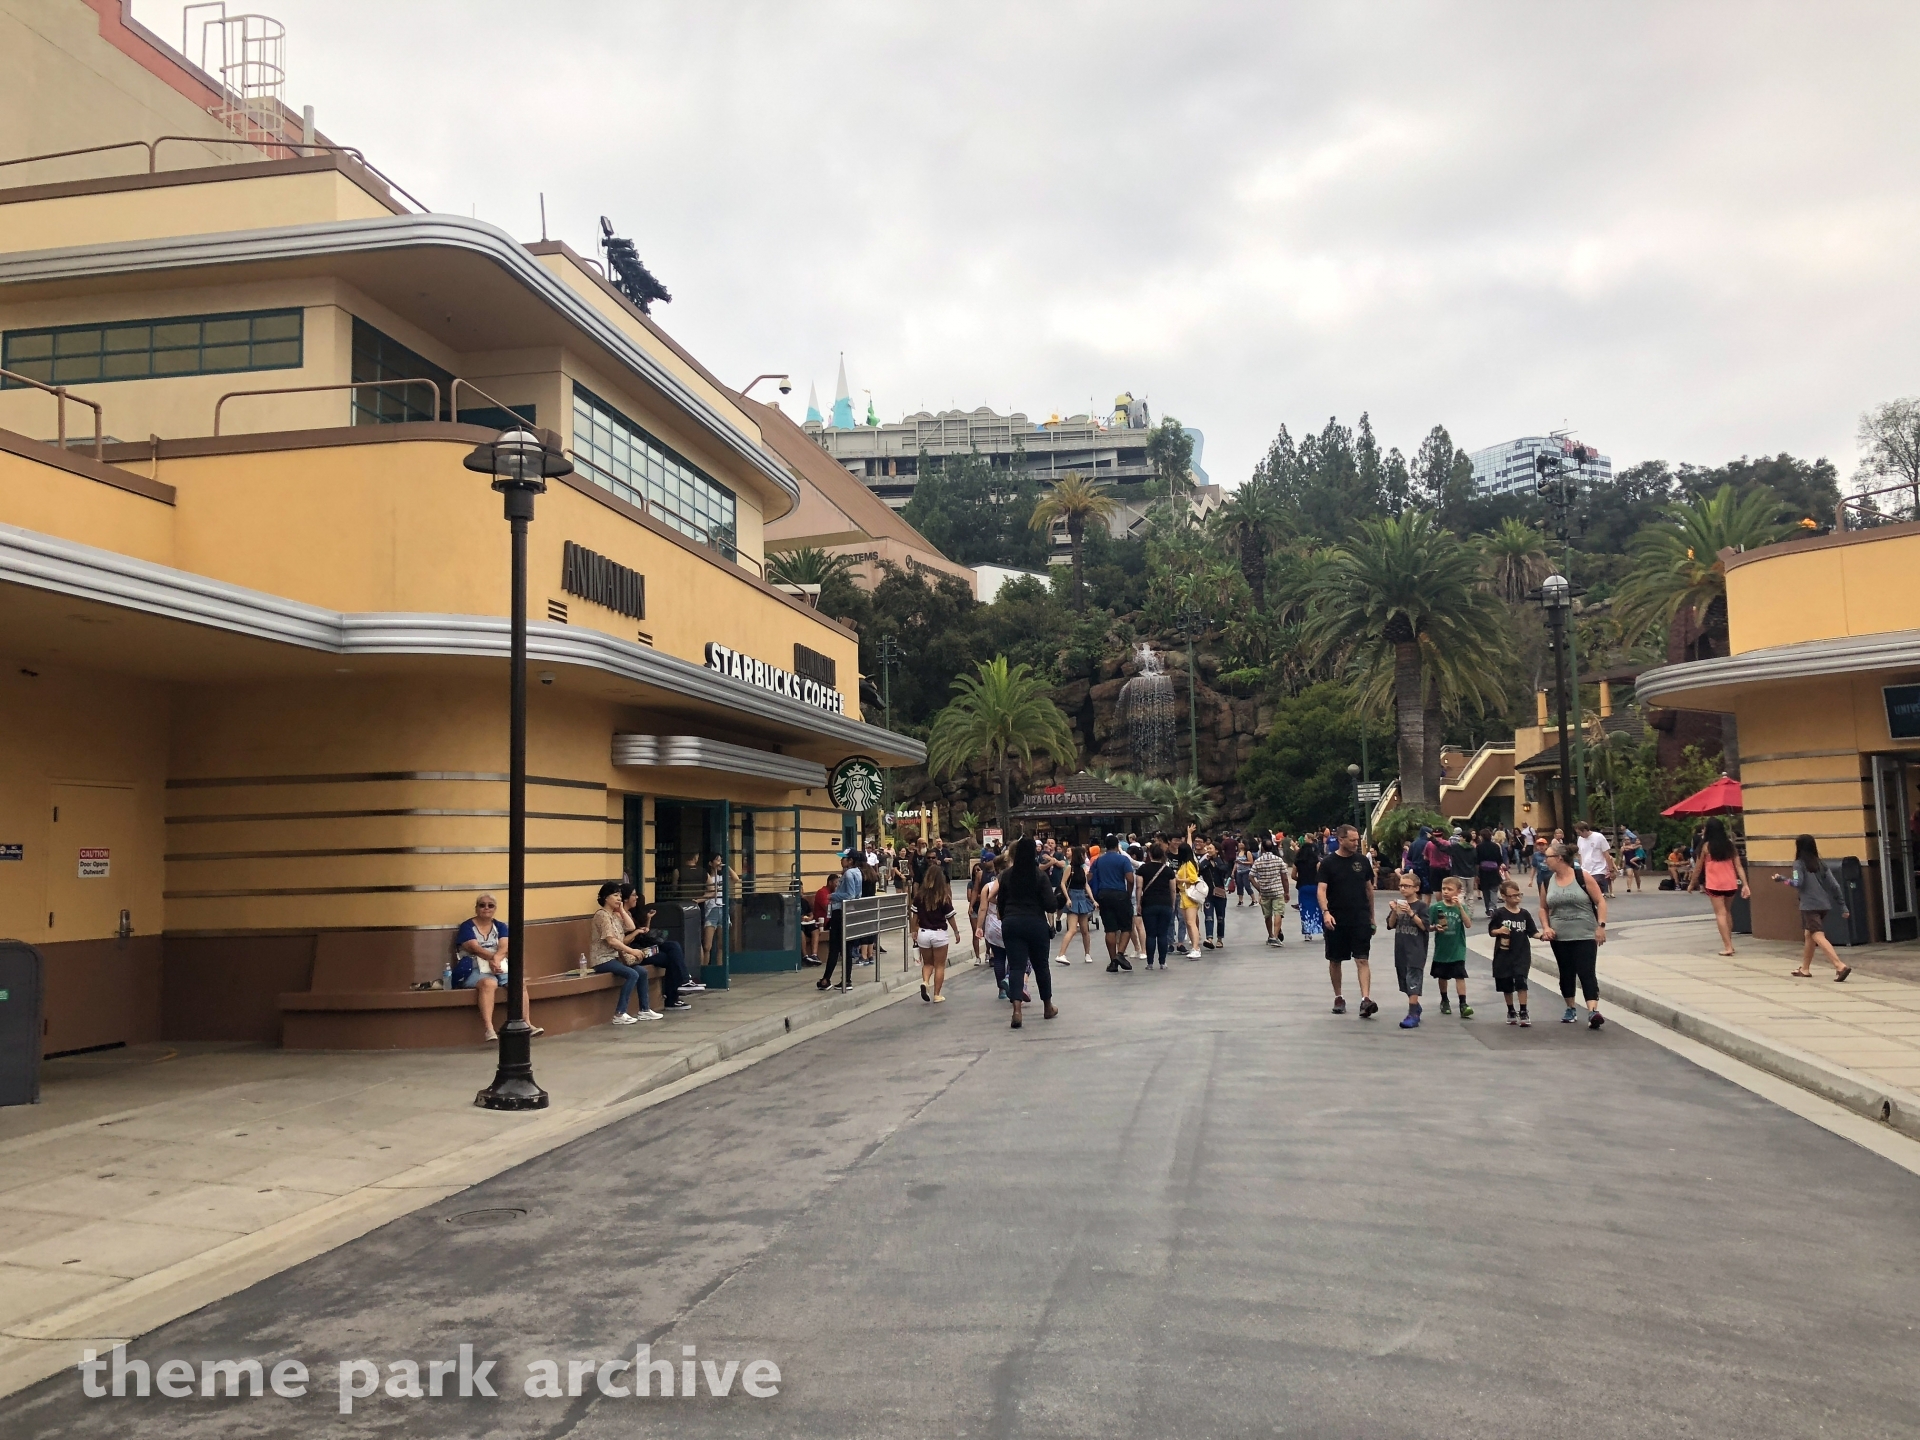 Lower Lot at Universal Studios Hollywood Theme Park Archive